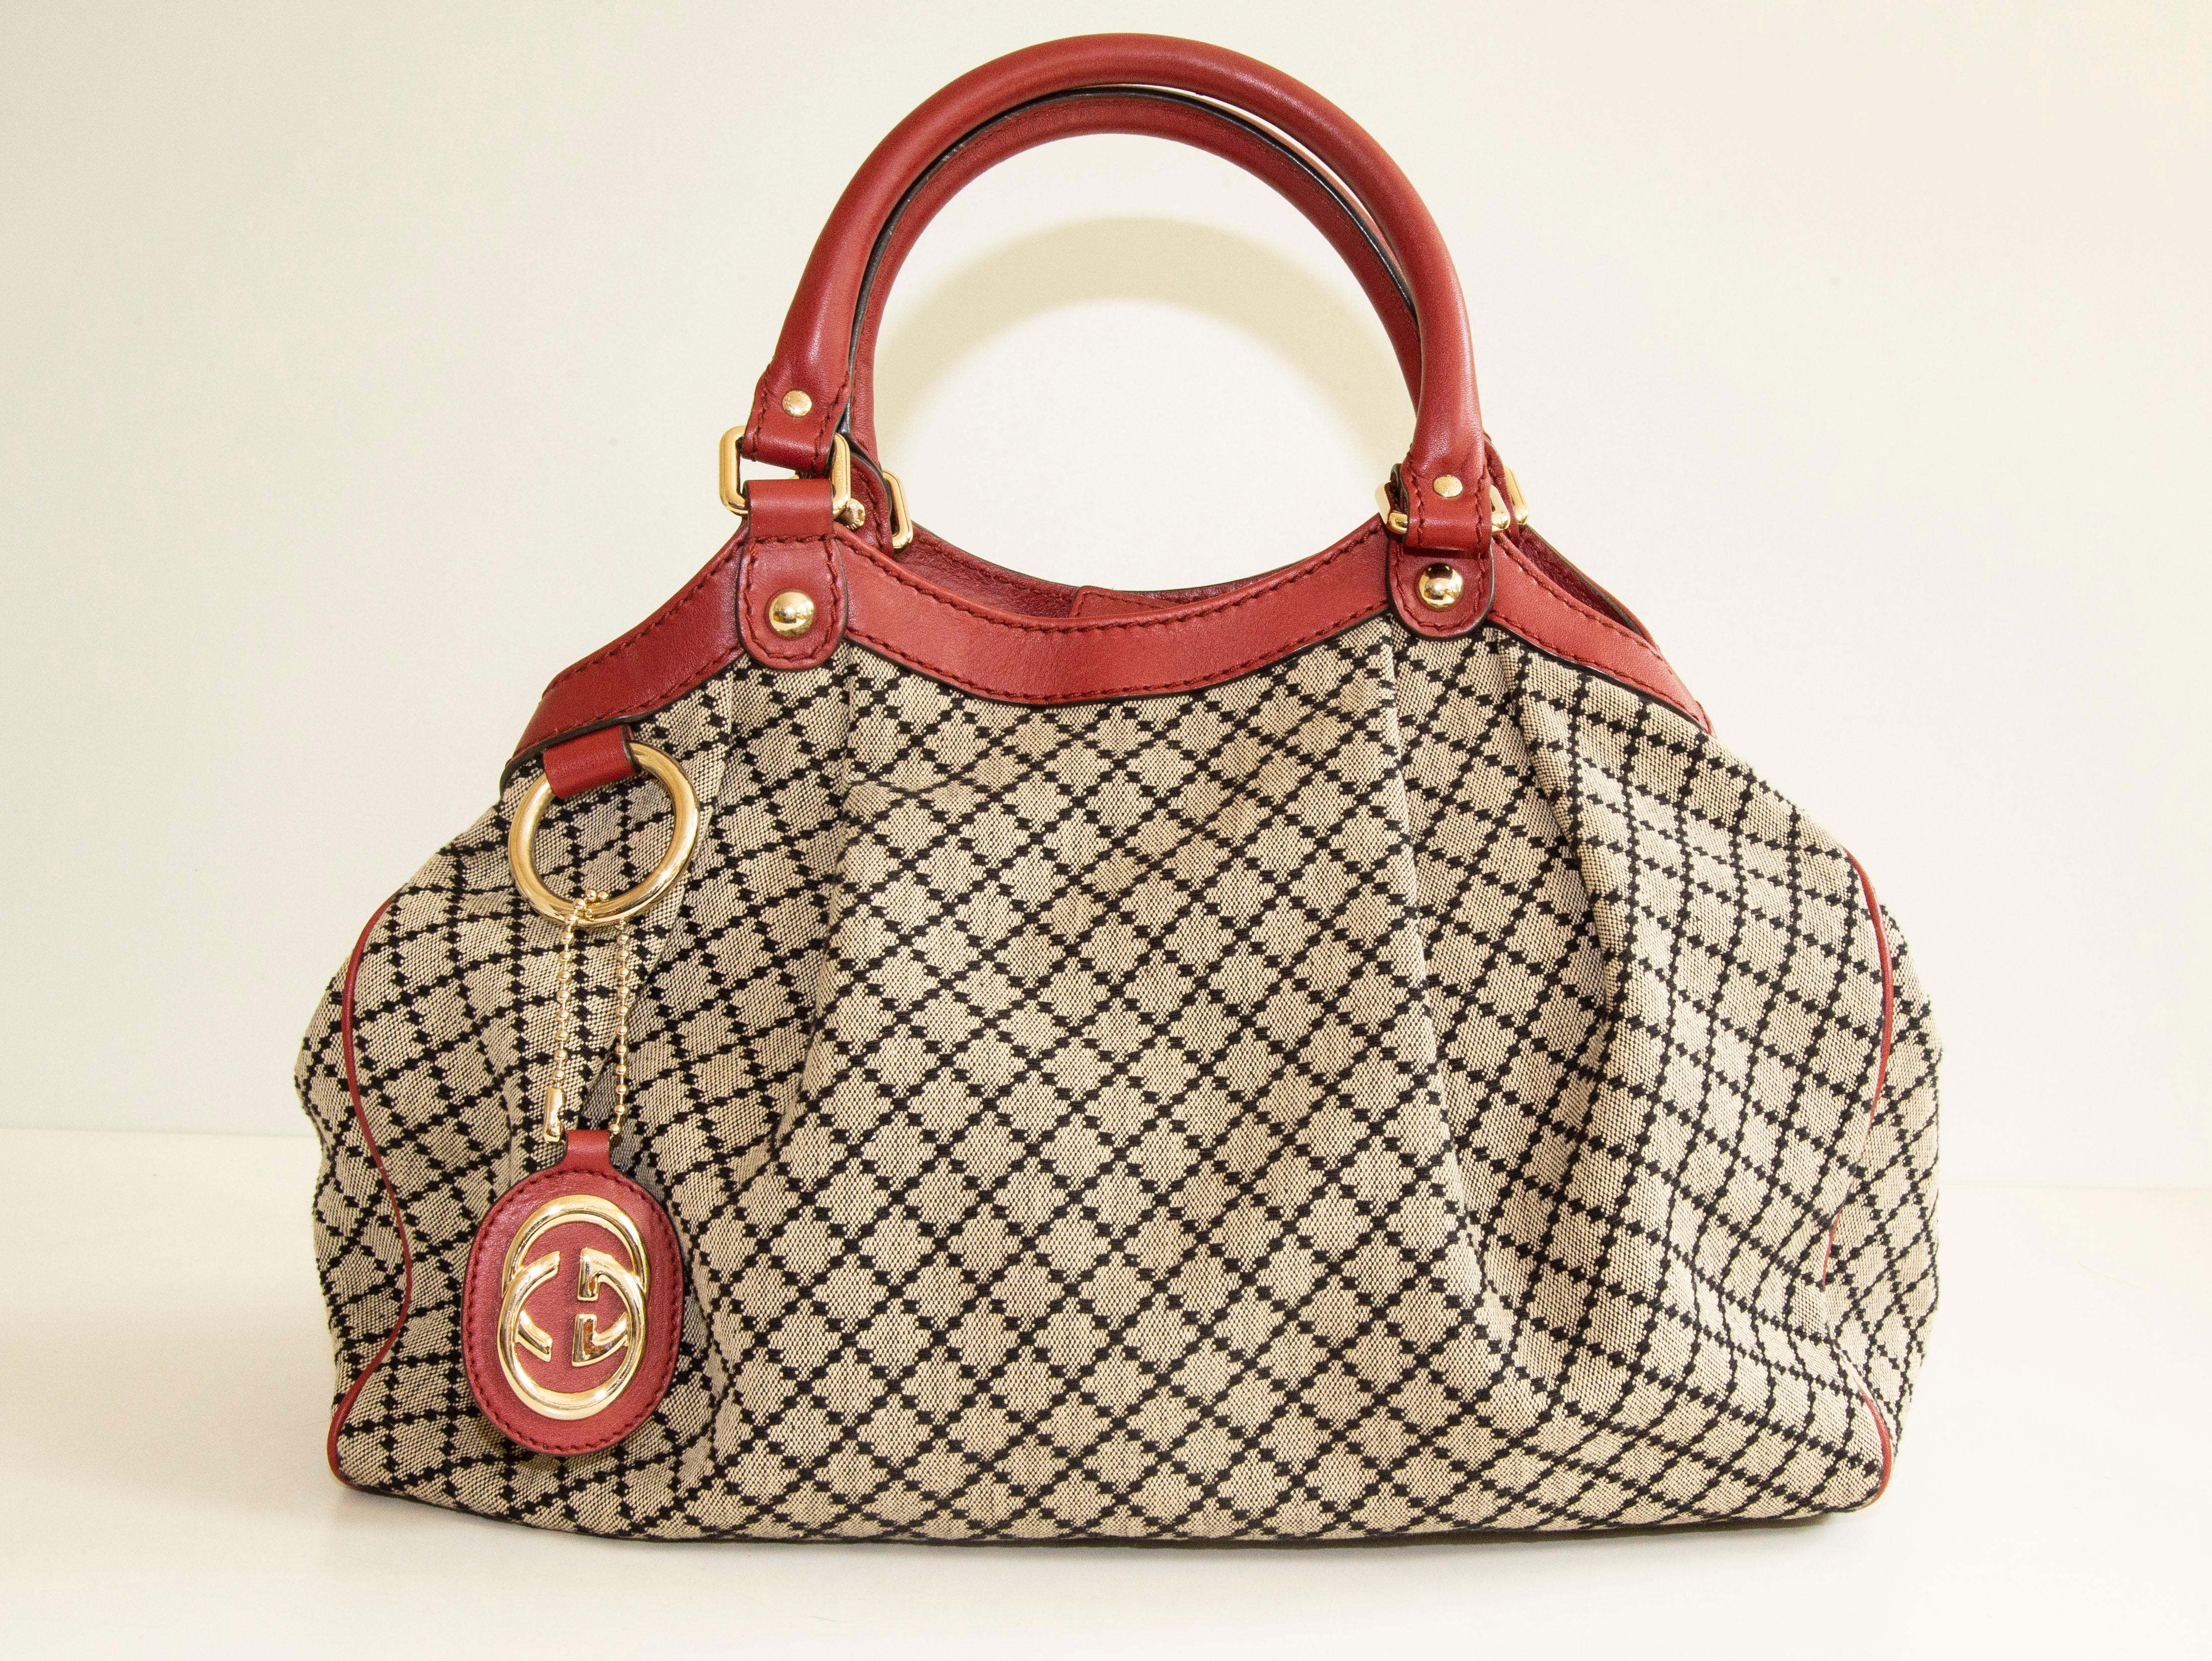 An authentic Gucci Sukey medium handbag/tote bag. The bag features a Diamante canvas, red leather trim, and light-gold-toned hardware. The interior is lined with brown fabric and there is one zipped side pocket. The interior is neat & clean. The